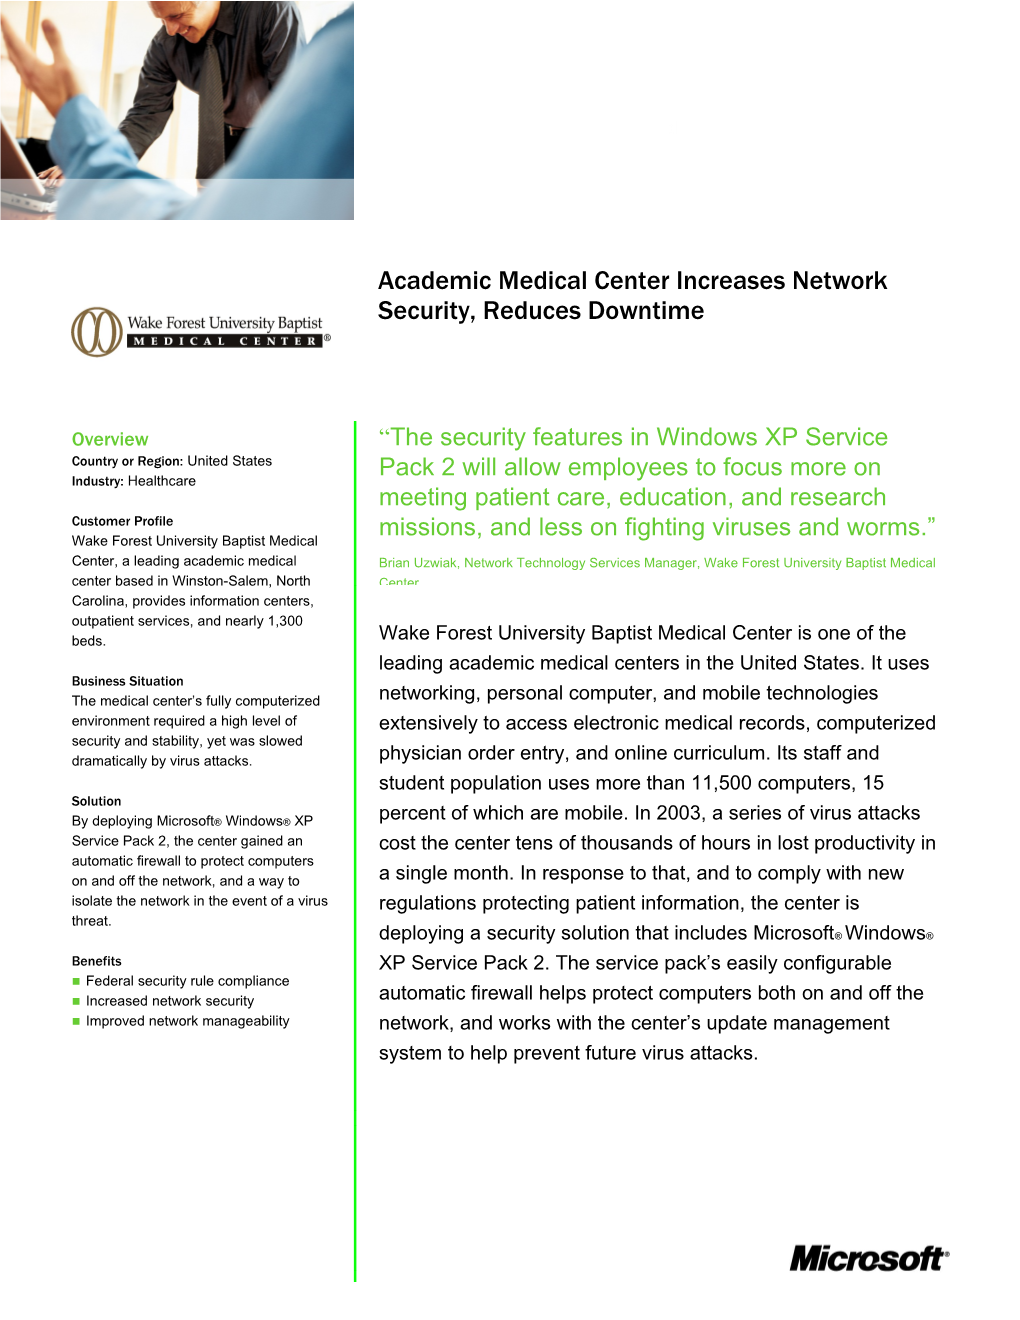 Academic Medical Center Increases Network Security, Reduces Downtime